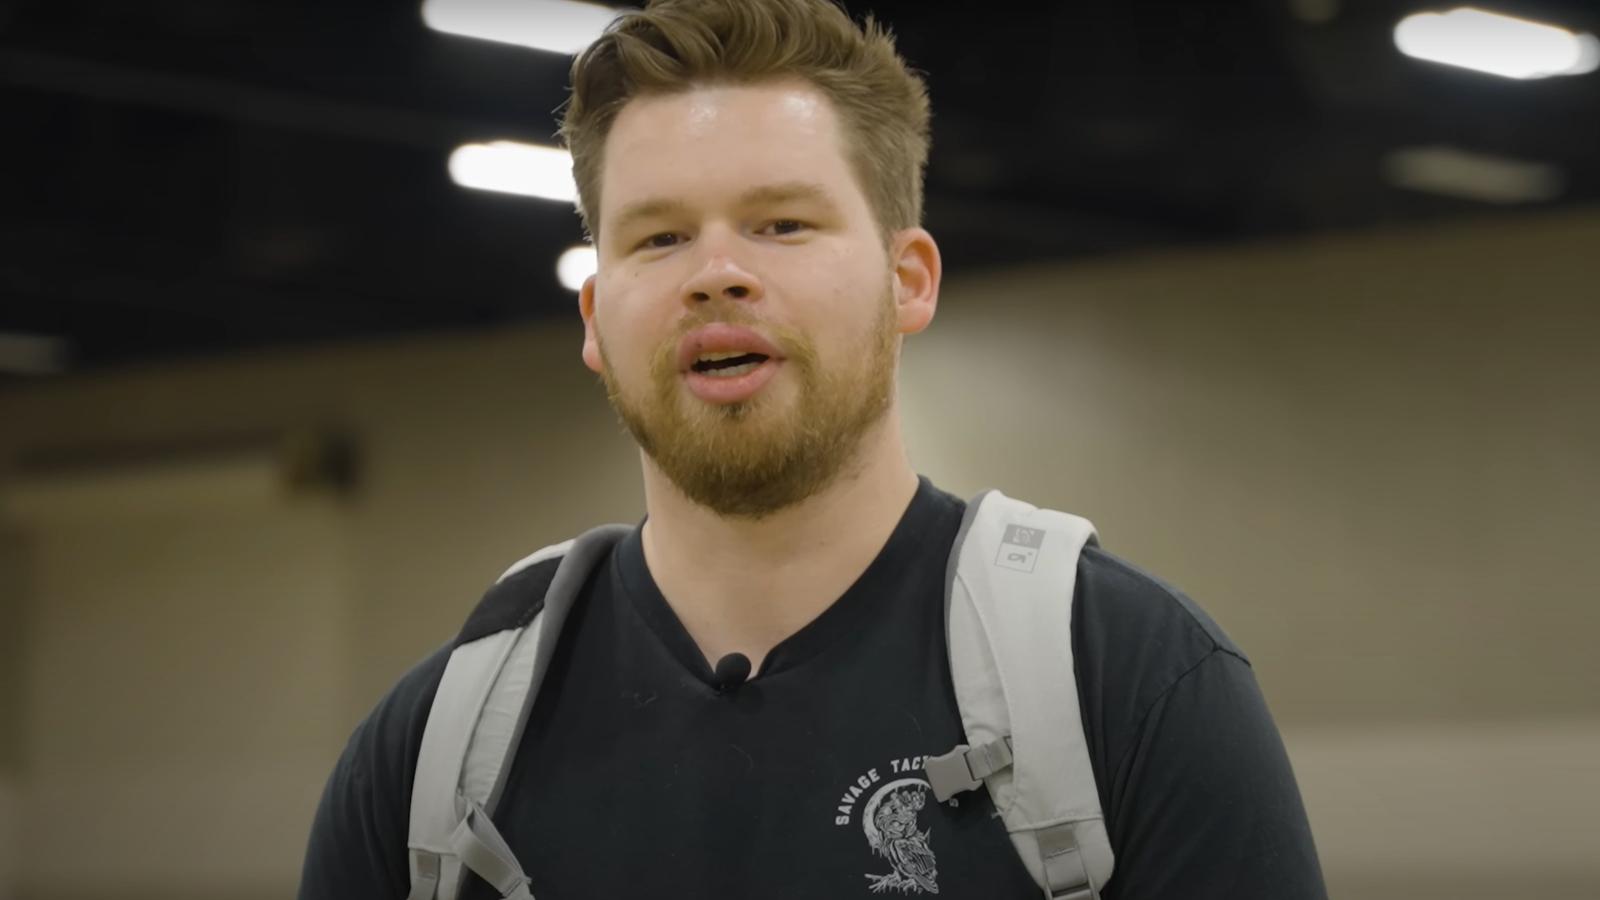 Ian 'Crimsix' Porter has retired from professional call of duty but he's still a pro at the end of the day.